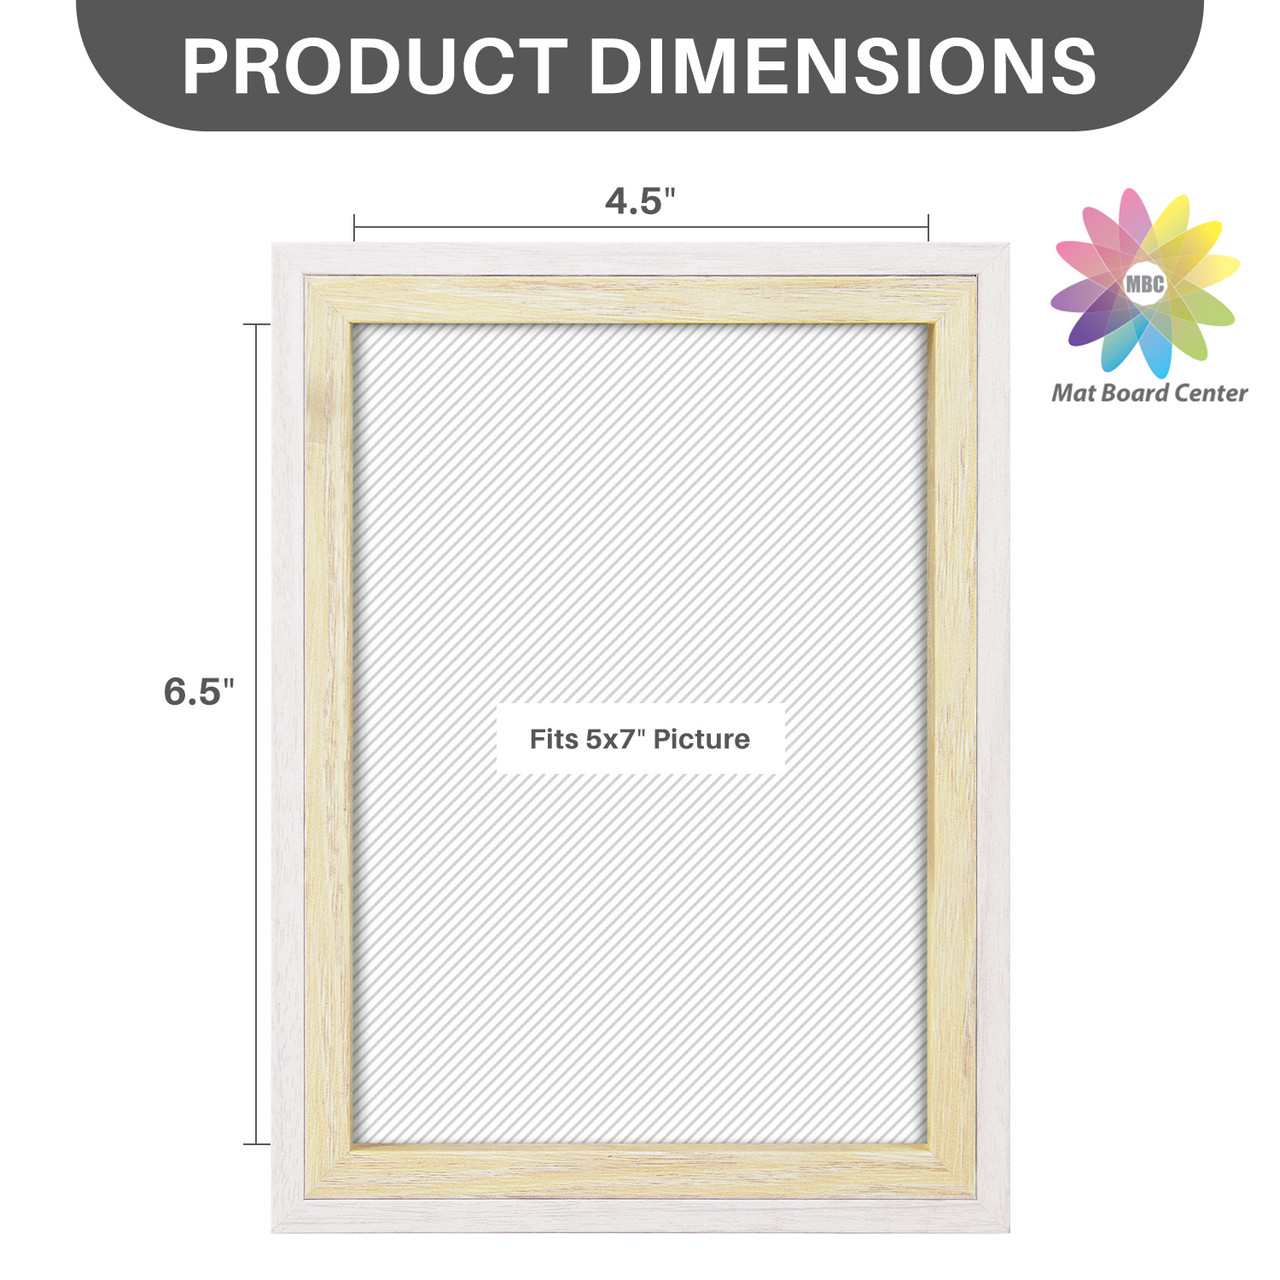 5x7 White Picture Mats with White Core for 4x6 Pictures - Fits 5x7 Frame